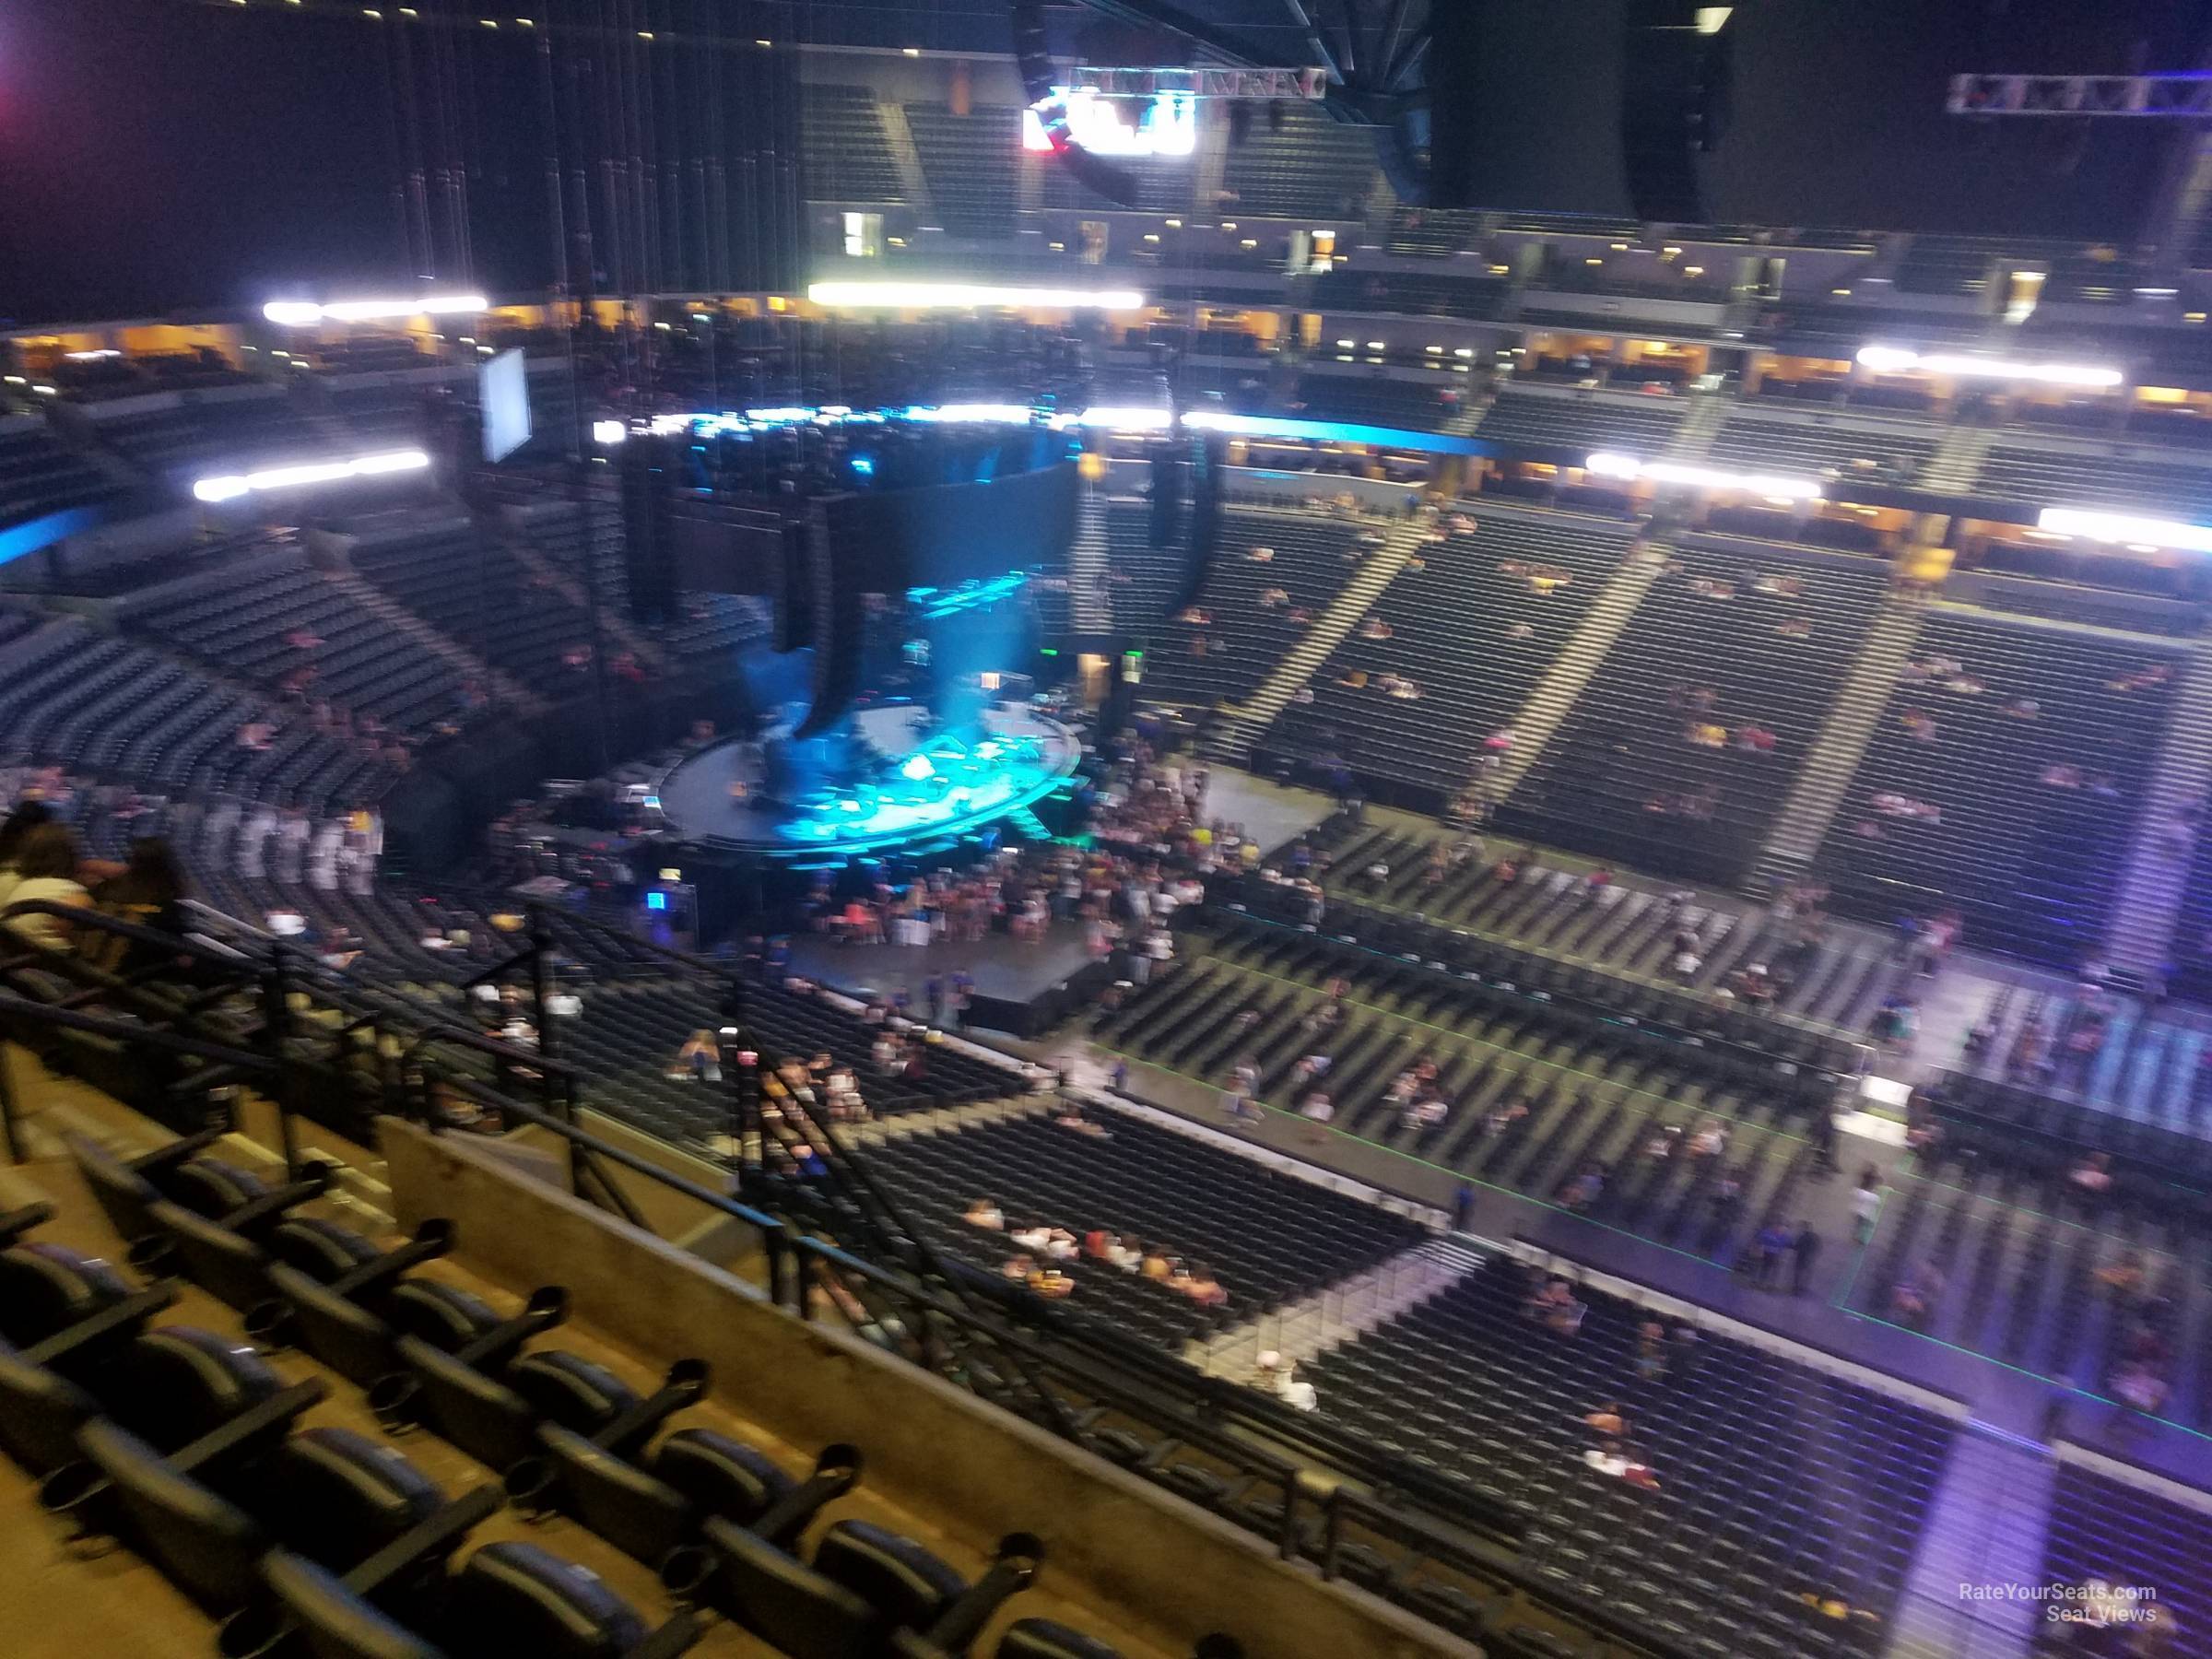 section 342, row 13 seat view  for concert - ball arena